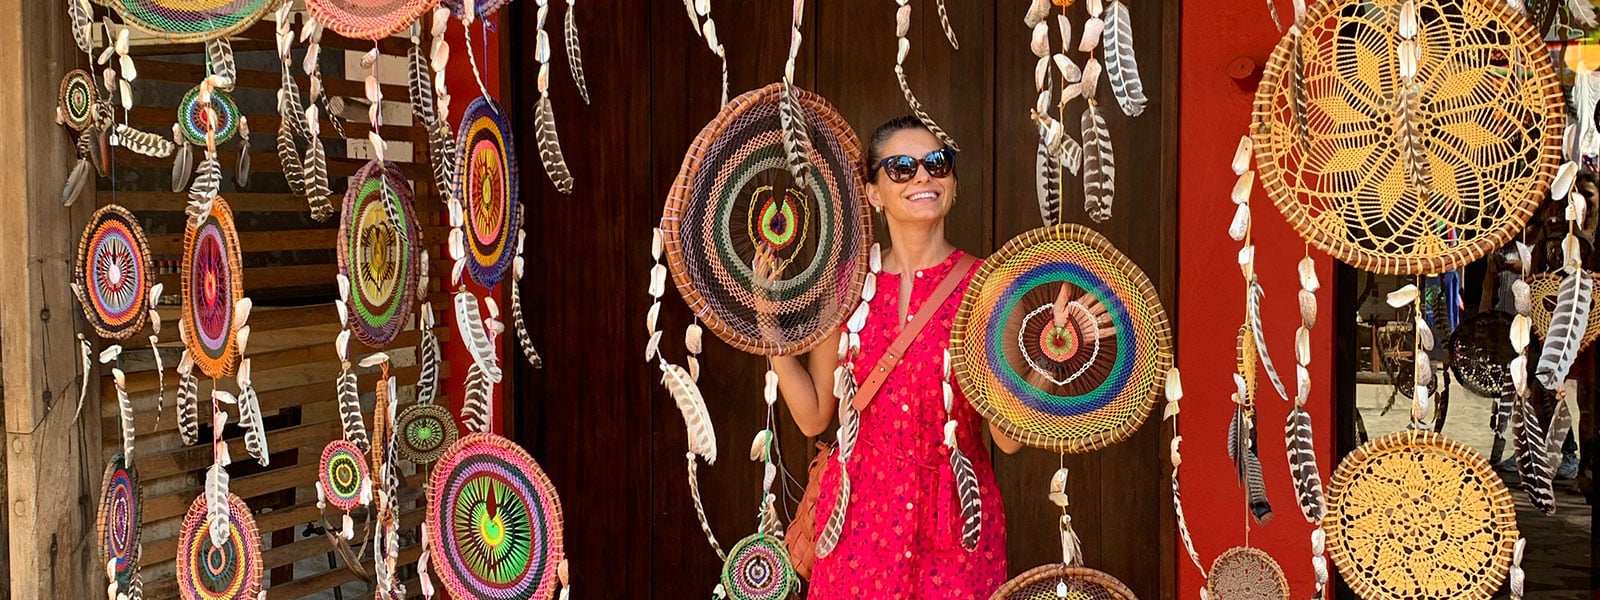 Visit colorful shops and boutiques in Sayulita